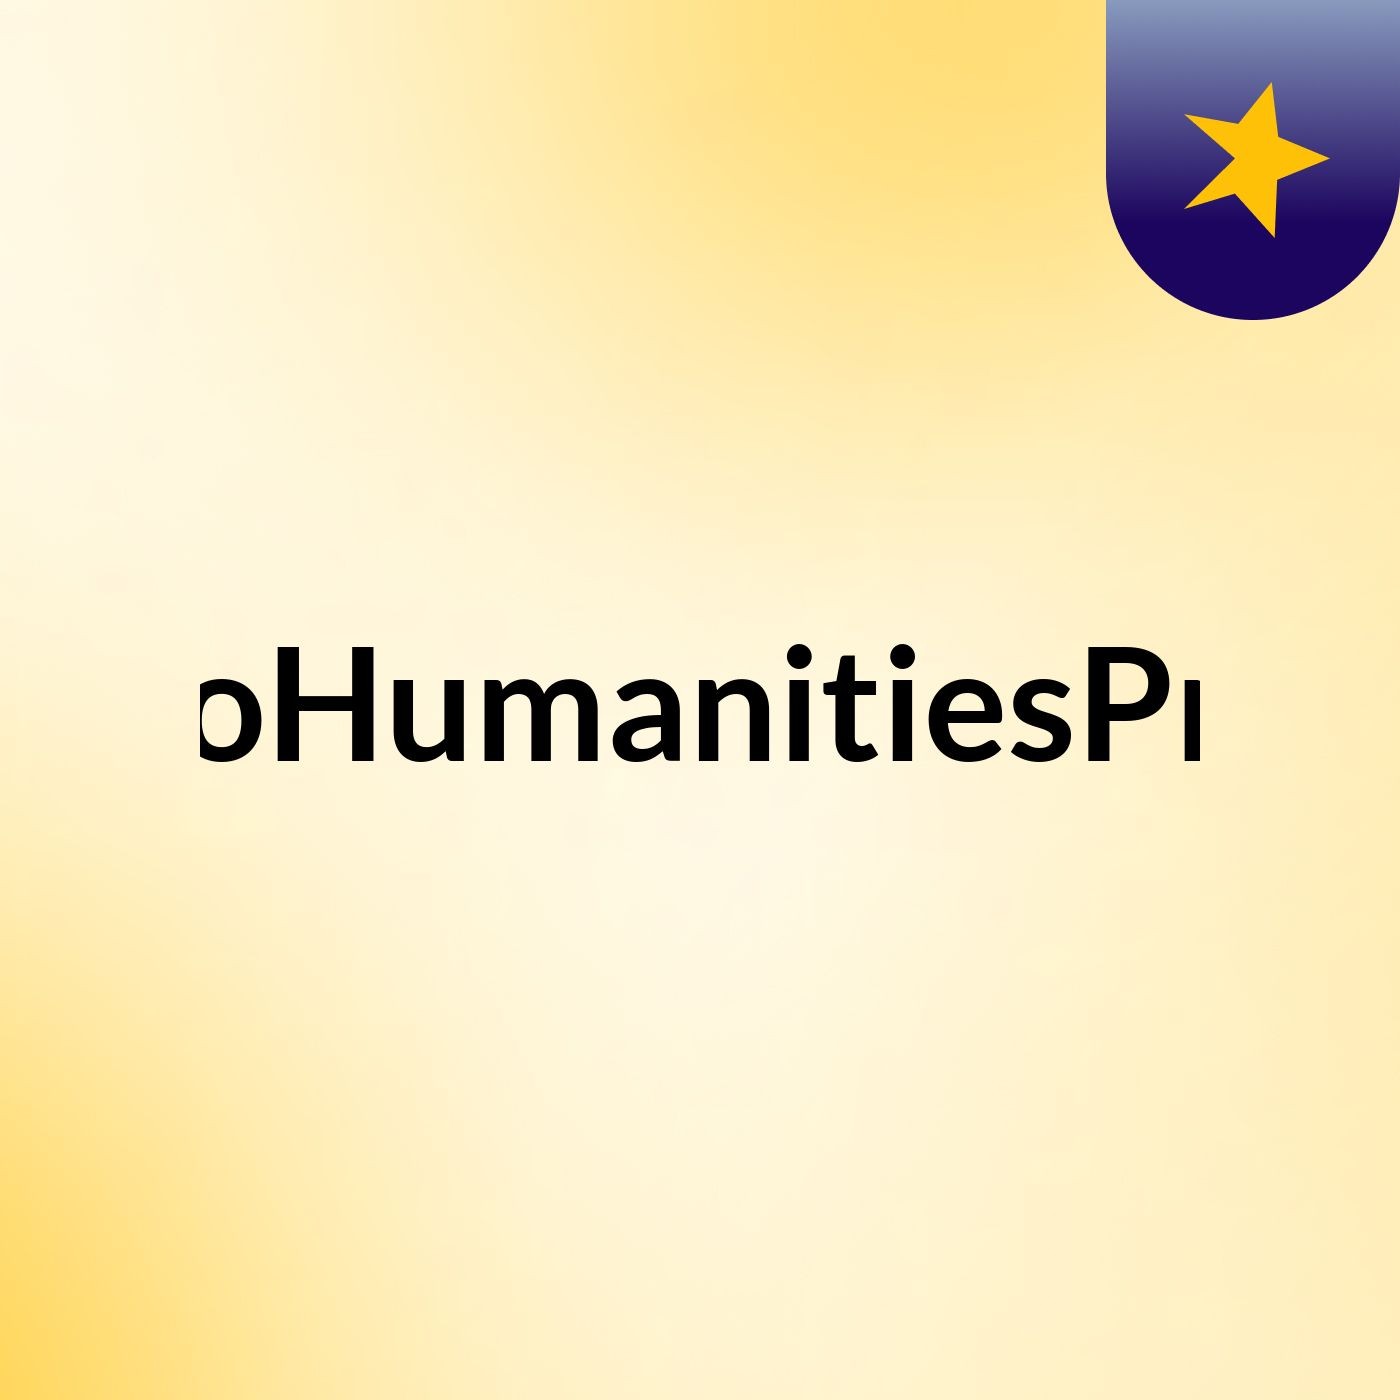 IntoToHumanitiesProject